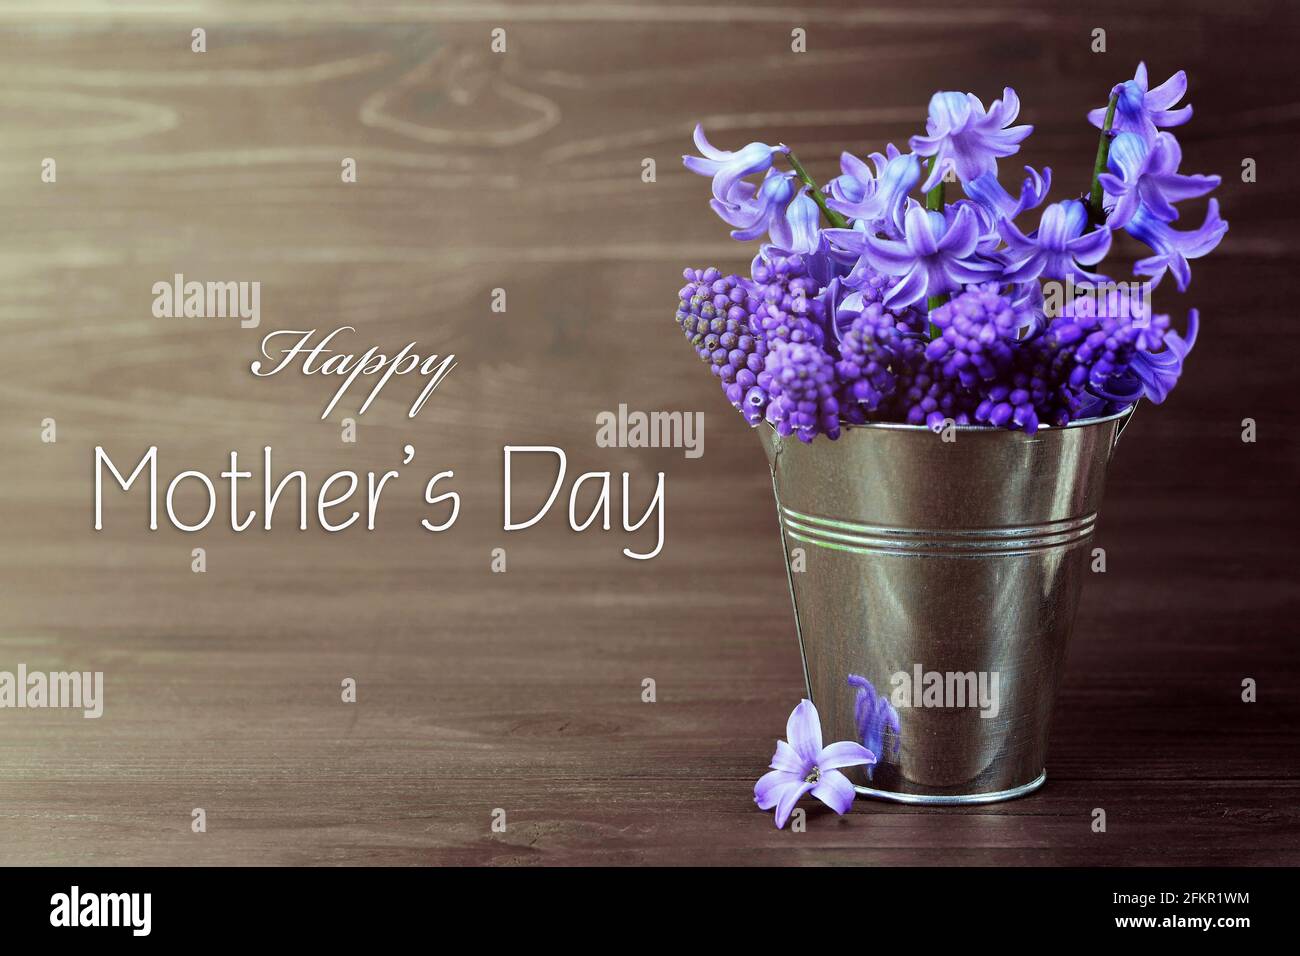 Happy Mothers Day card with spring flowers in bucket Stock Photo